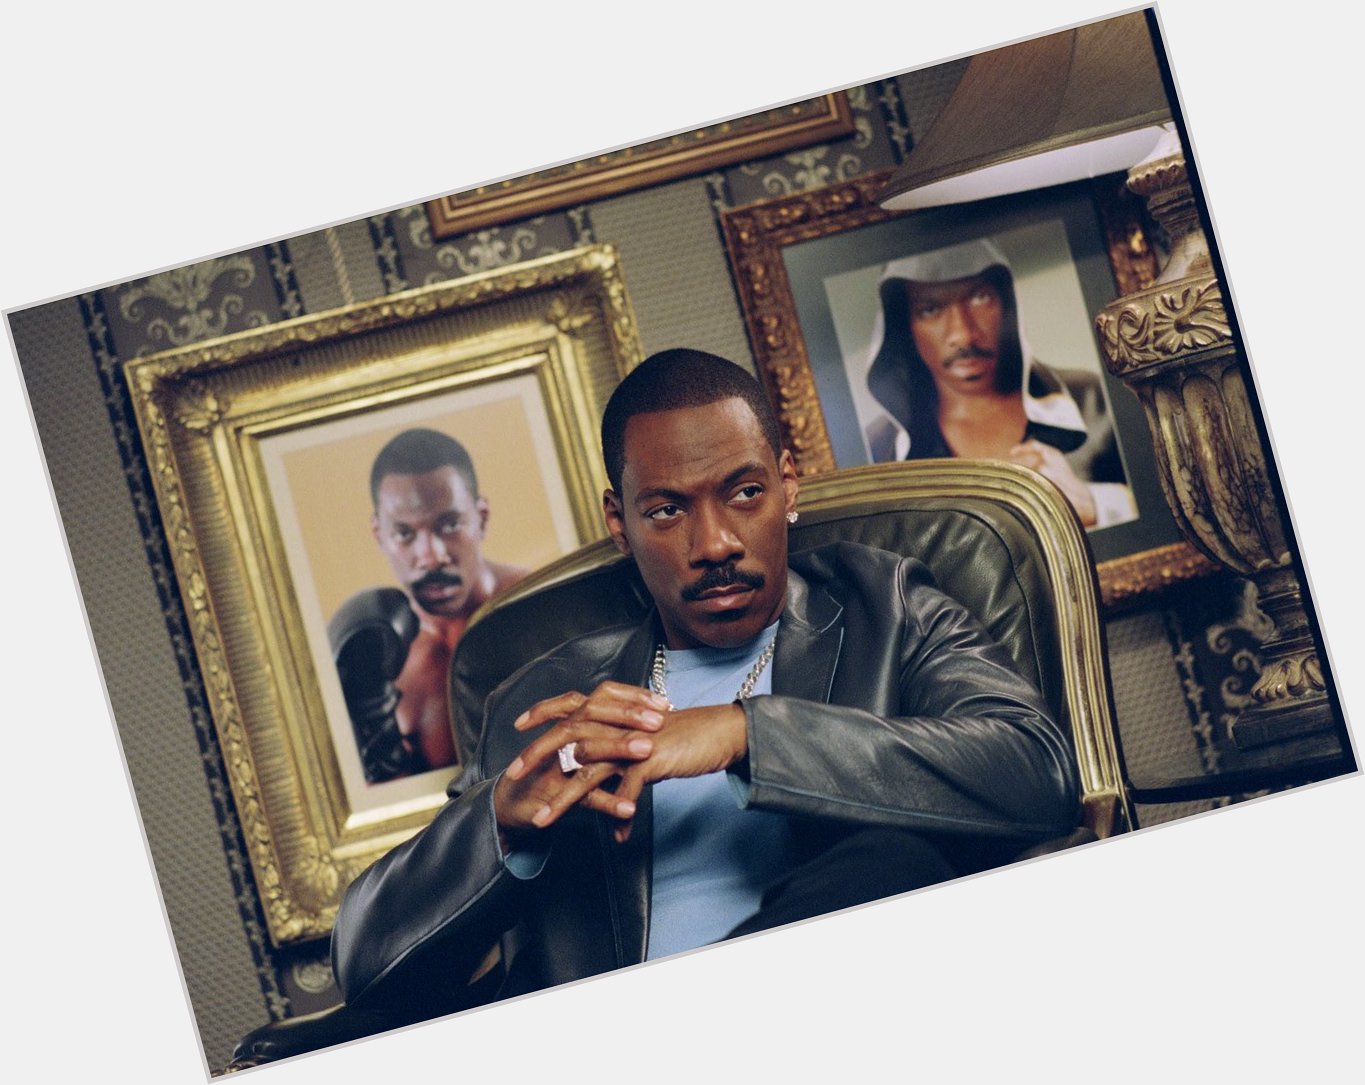 On April 3, 1961 the Greatest Comedian of All Time was born! Happy Birthday to Eddie Murphy!   